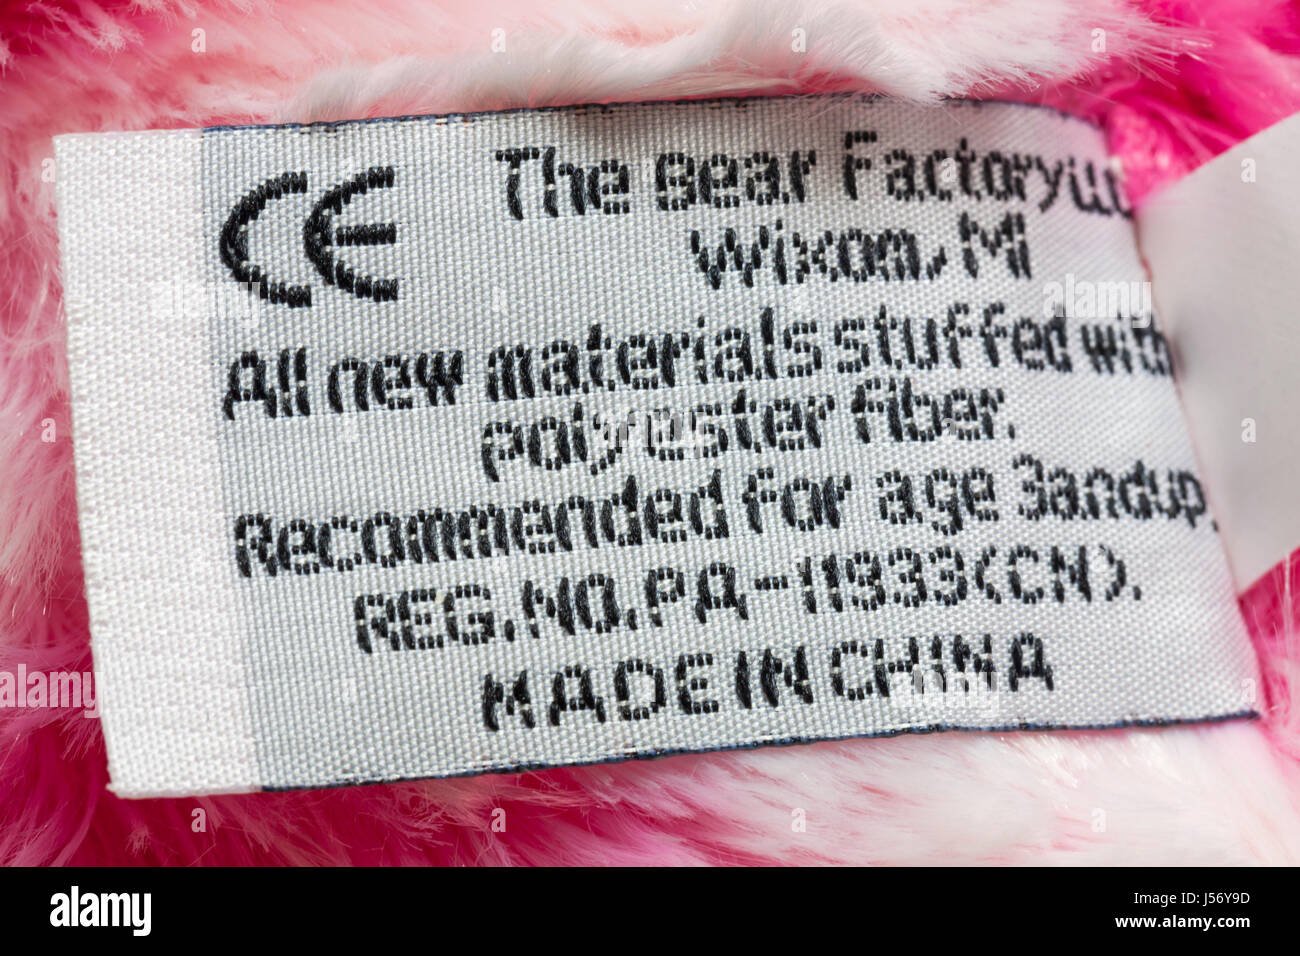 Label in pink and white bear by The Bear Factory made in China, all new materials stuffed with polyester fiber, recommended for age 3andup, CE symbol Stock Photo